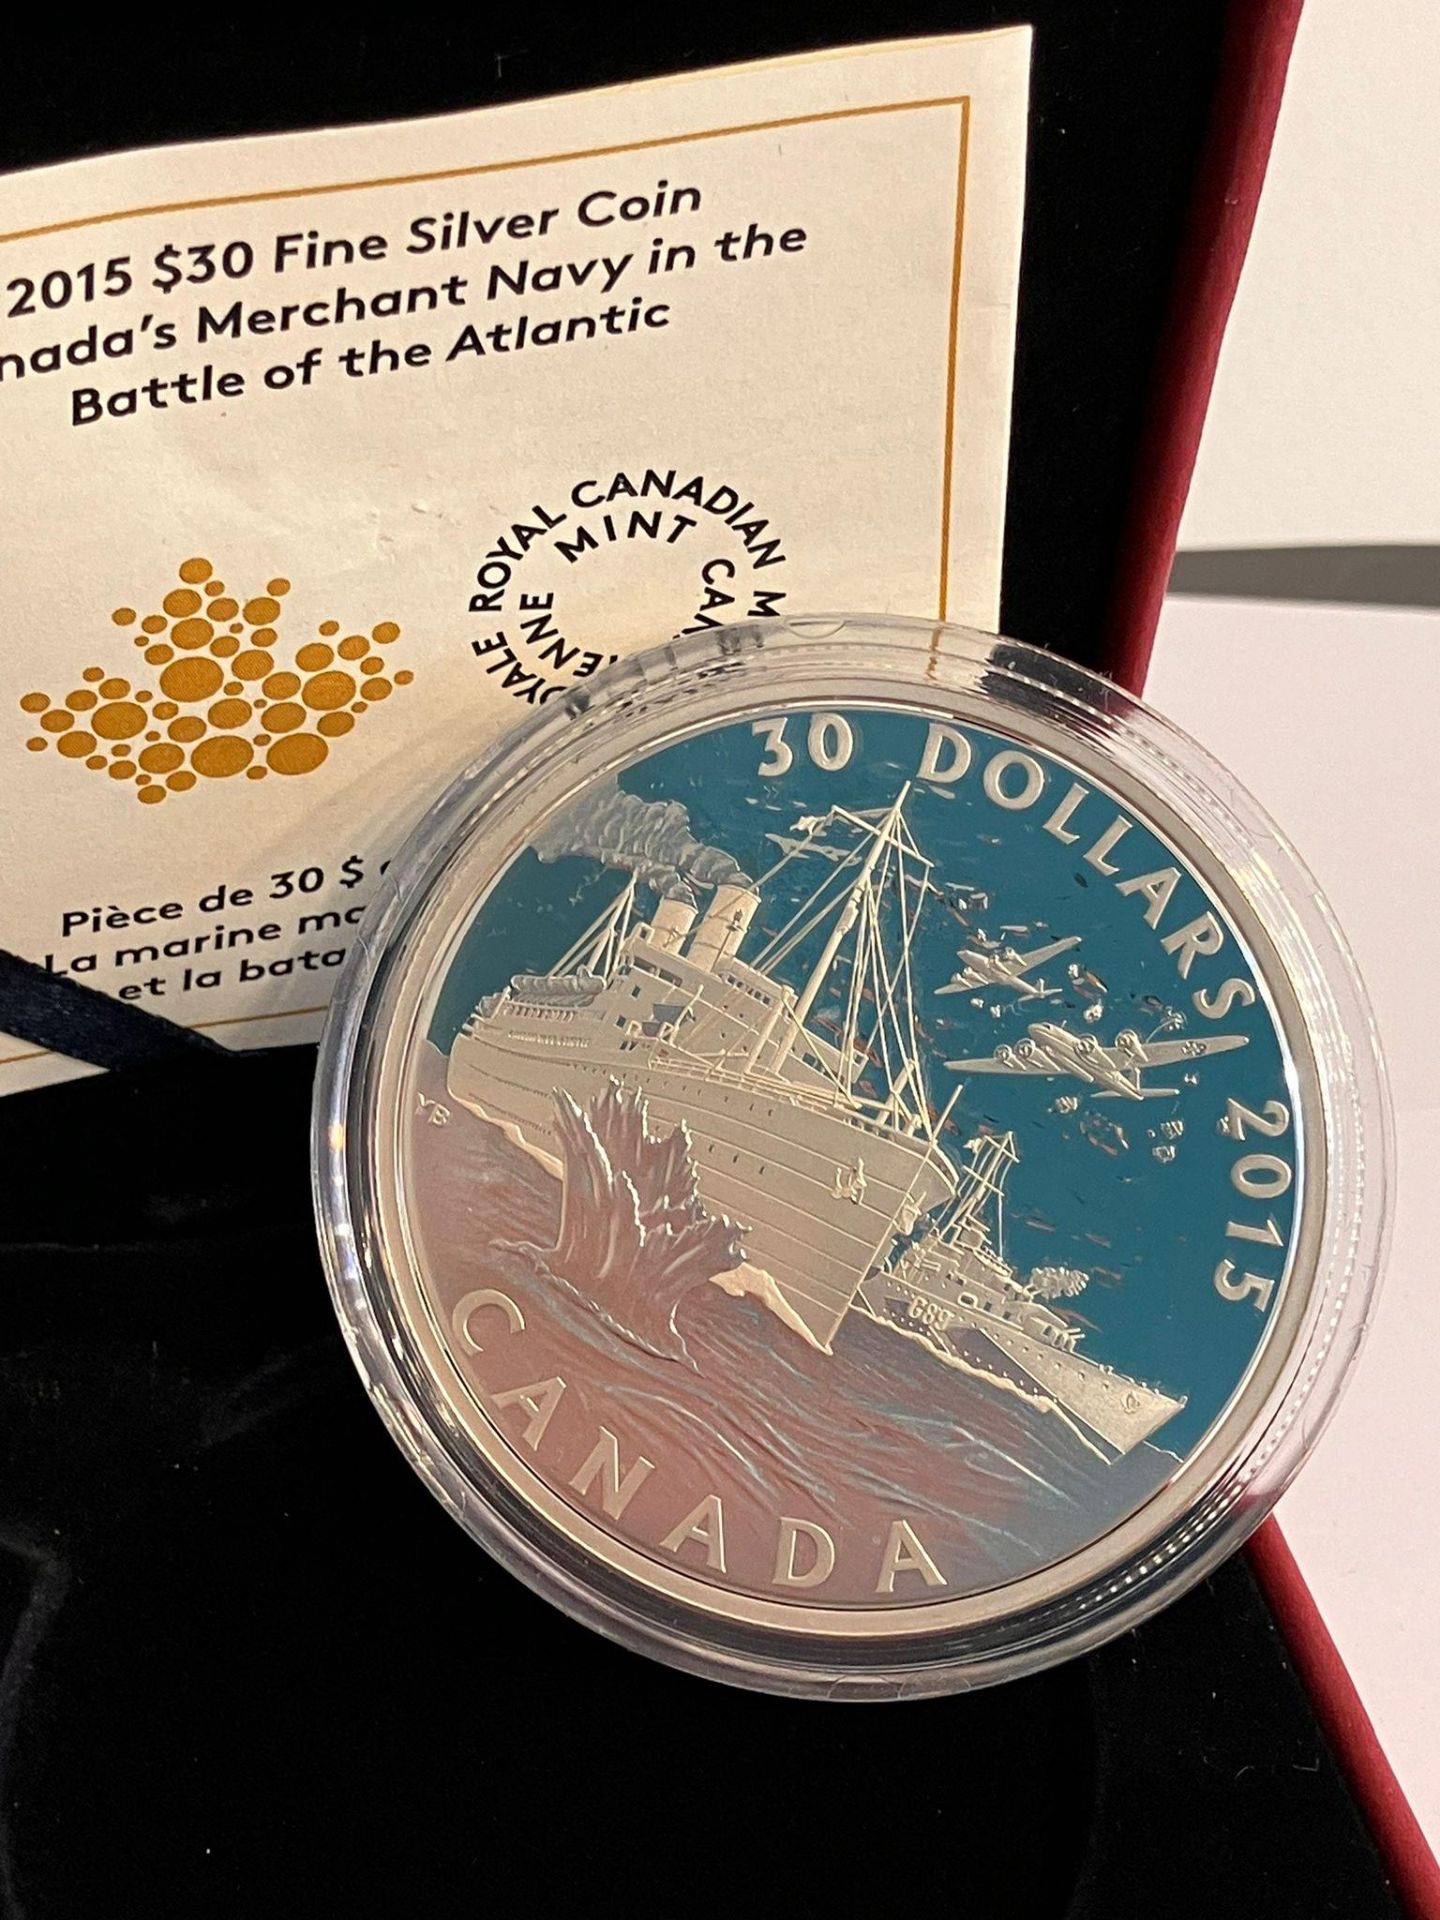 2015 CANADA 30 DOLLAR SILVER COIN. Commemorating the Battle of the Atlantic. Issued by the